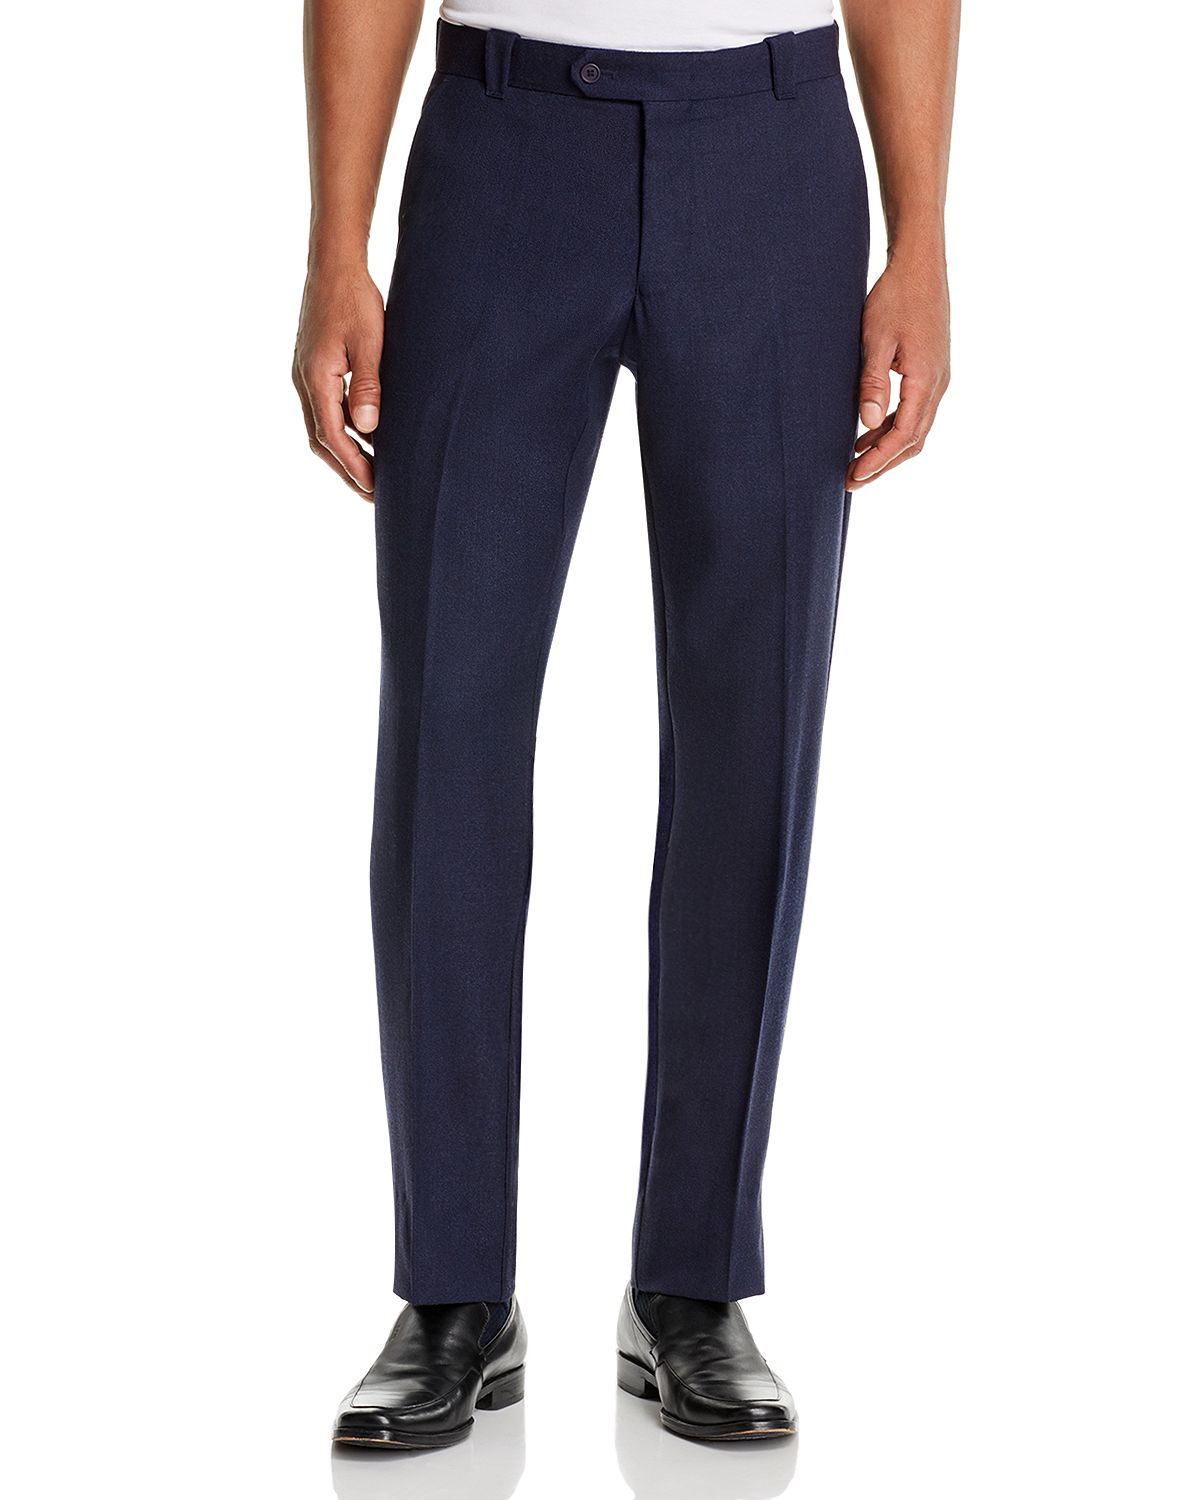 The Men's Store Wool Mlange Classic Fit Pants Navy Mix